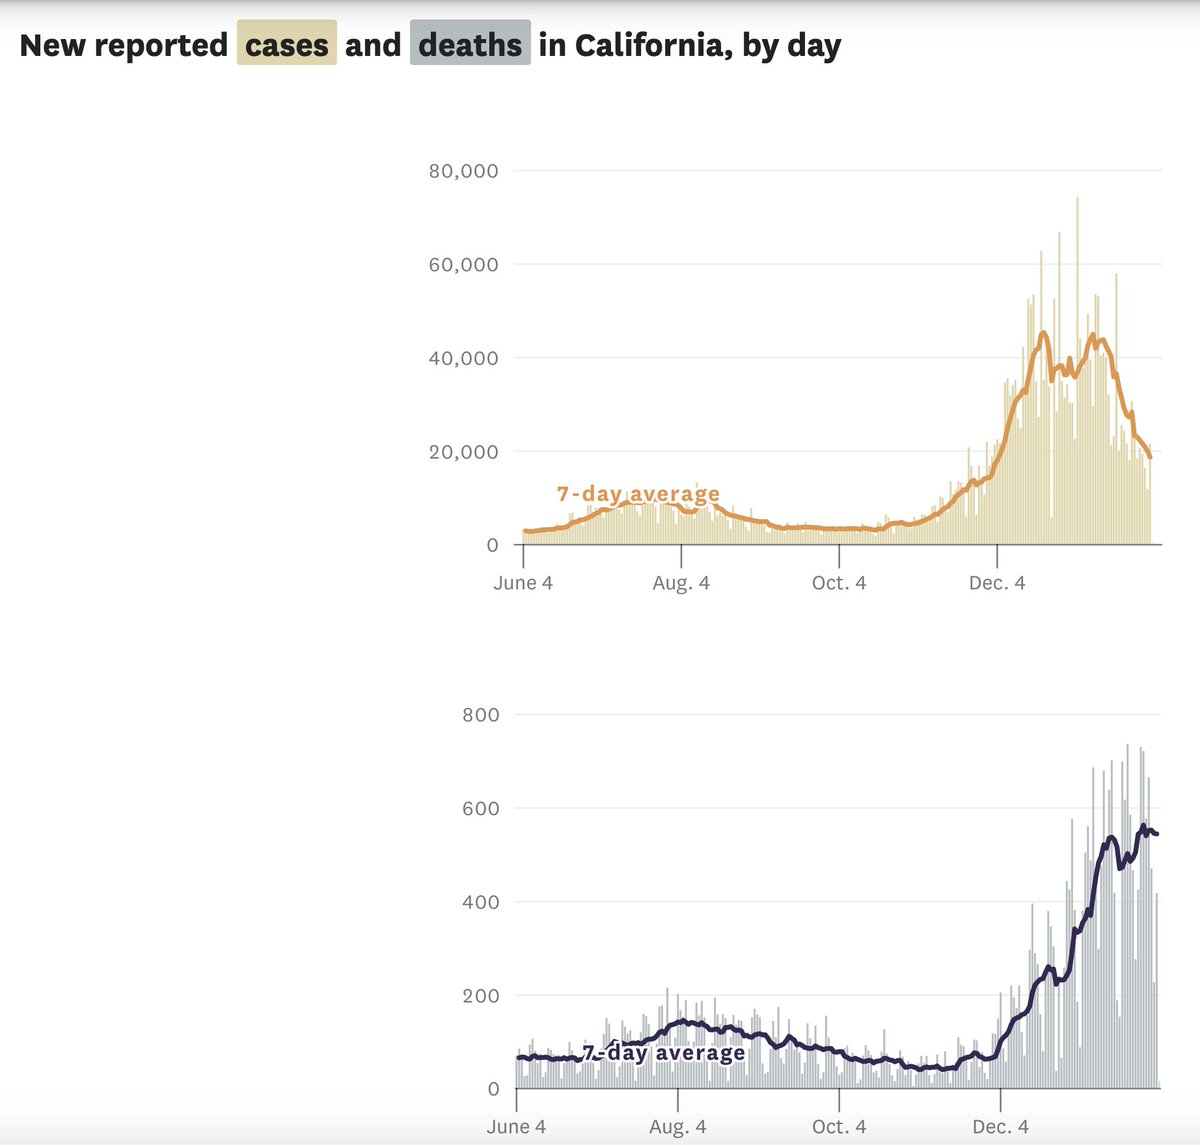 6/ CA cases falling fast, led by rapid drop in LA. Deaths haven’t budged. They're a lagging indicator; death rates should begin to fall soon. Falling cases/test+ argues against high prevalence of more virulent strain in CA (whether a homegrown “CA variant” or the “UK variant”).